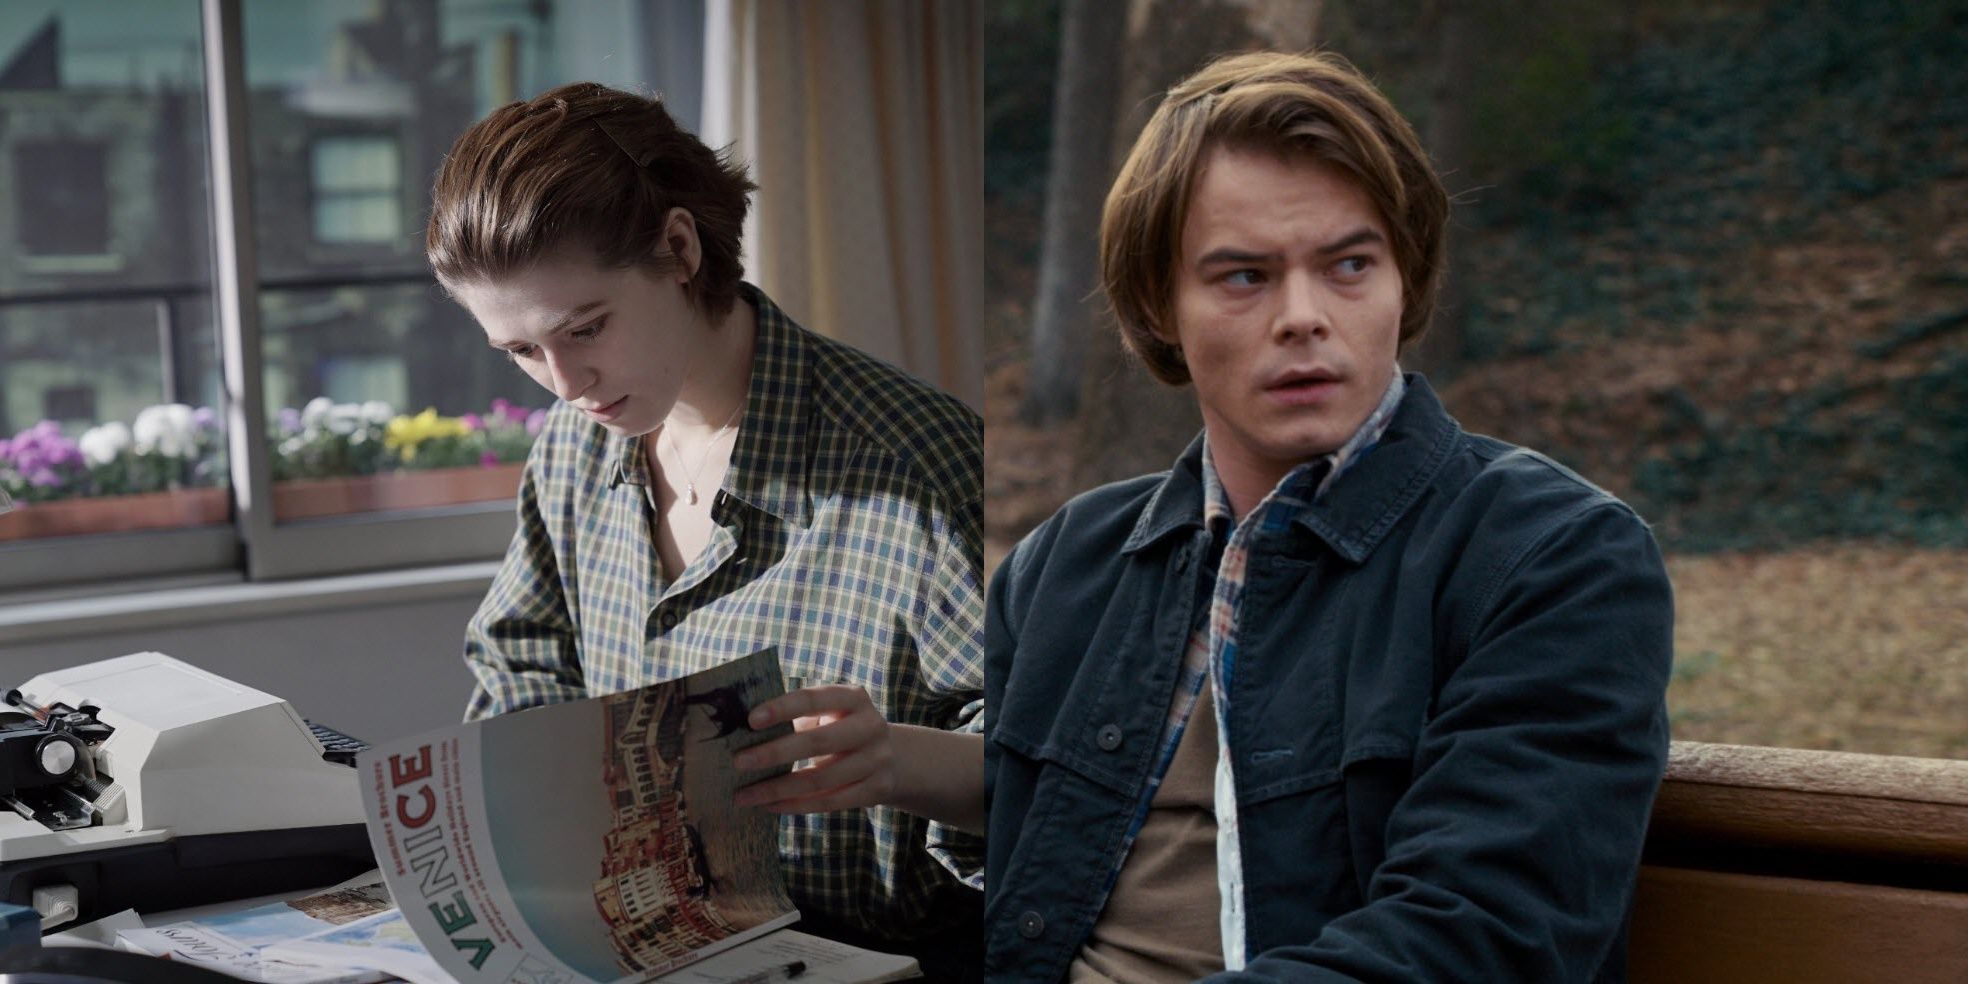 Split image of Charlie Heaton and Honor Swinton Byrne in The Souvenir, reading a magazine.